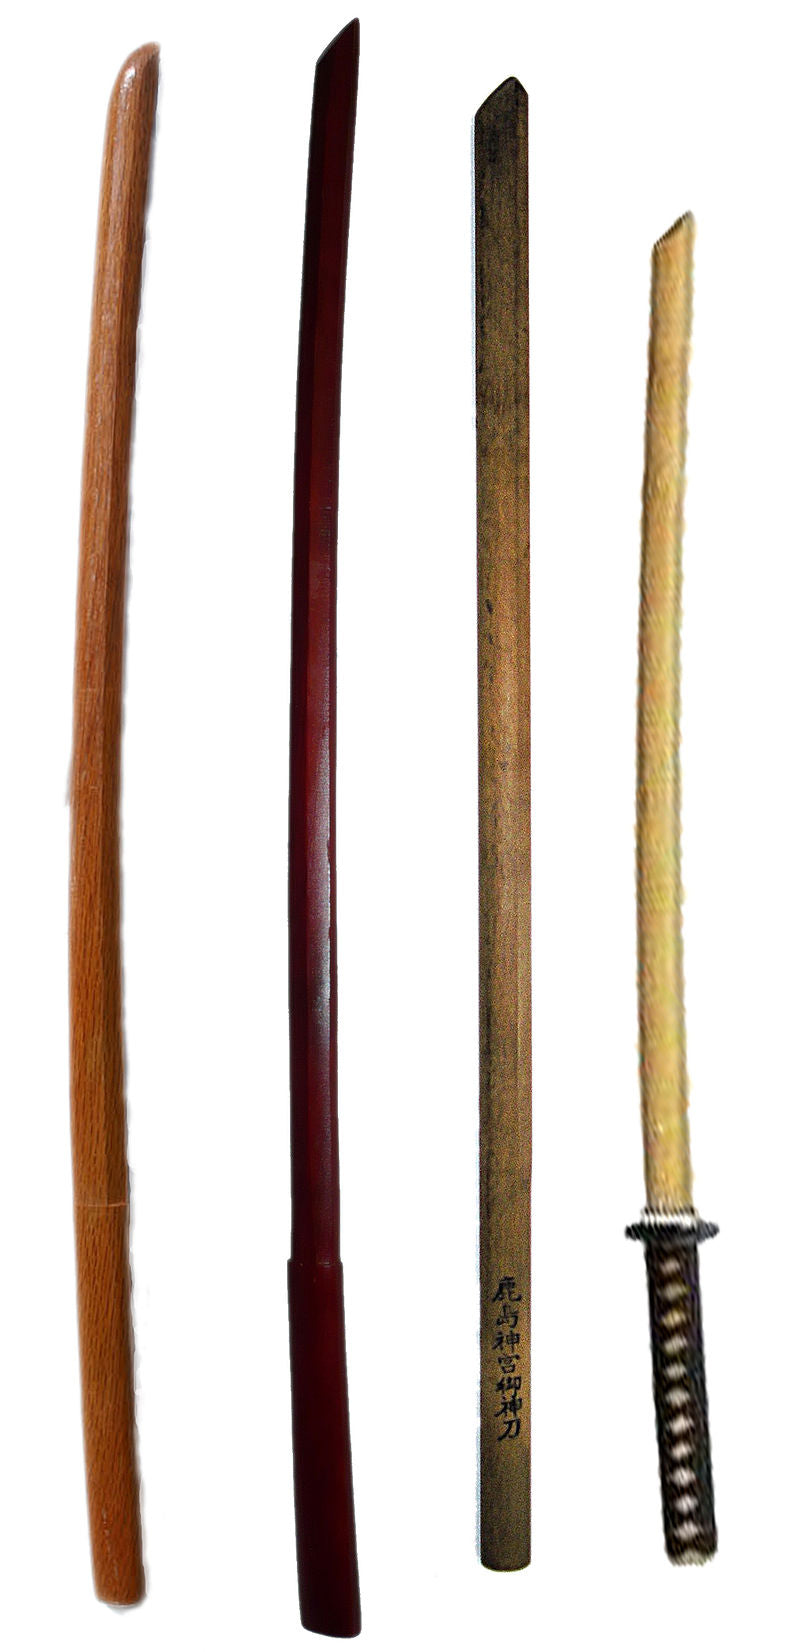 Comparing the Different Types of Bokken